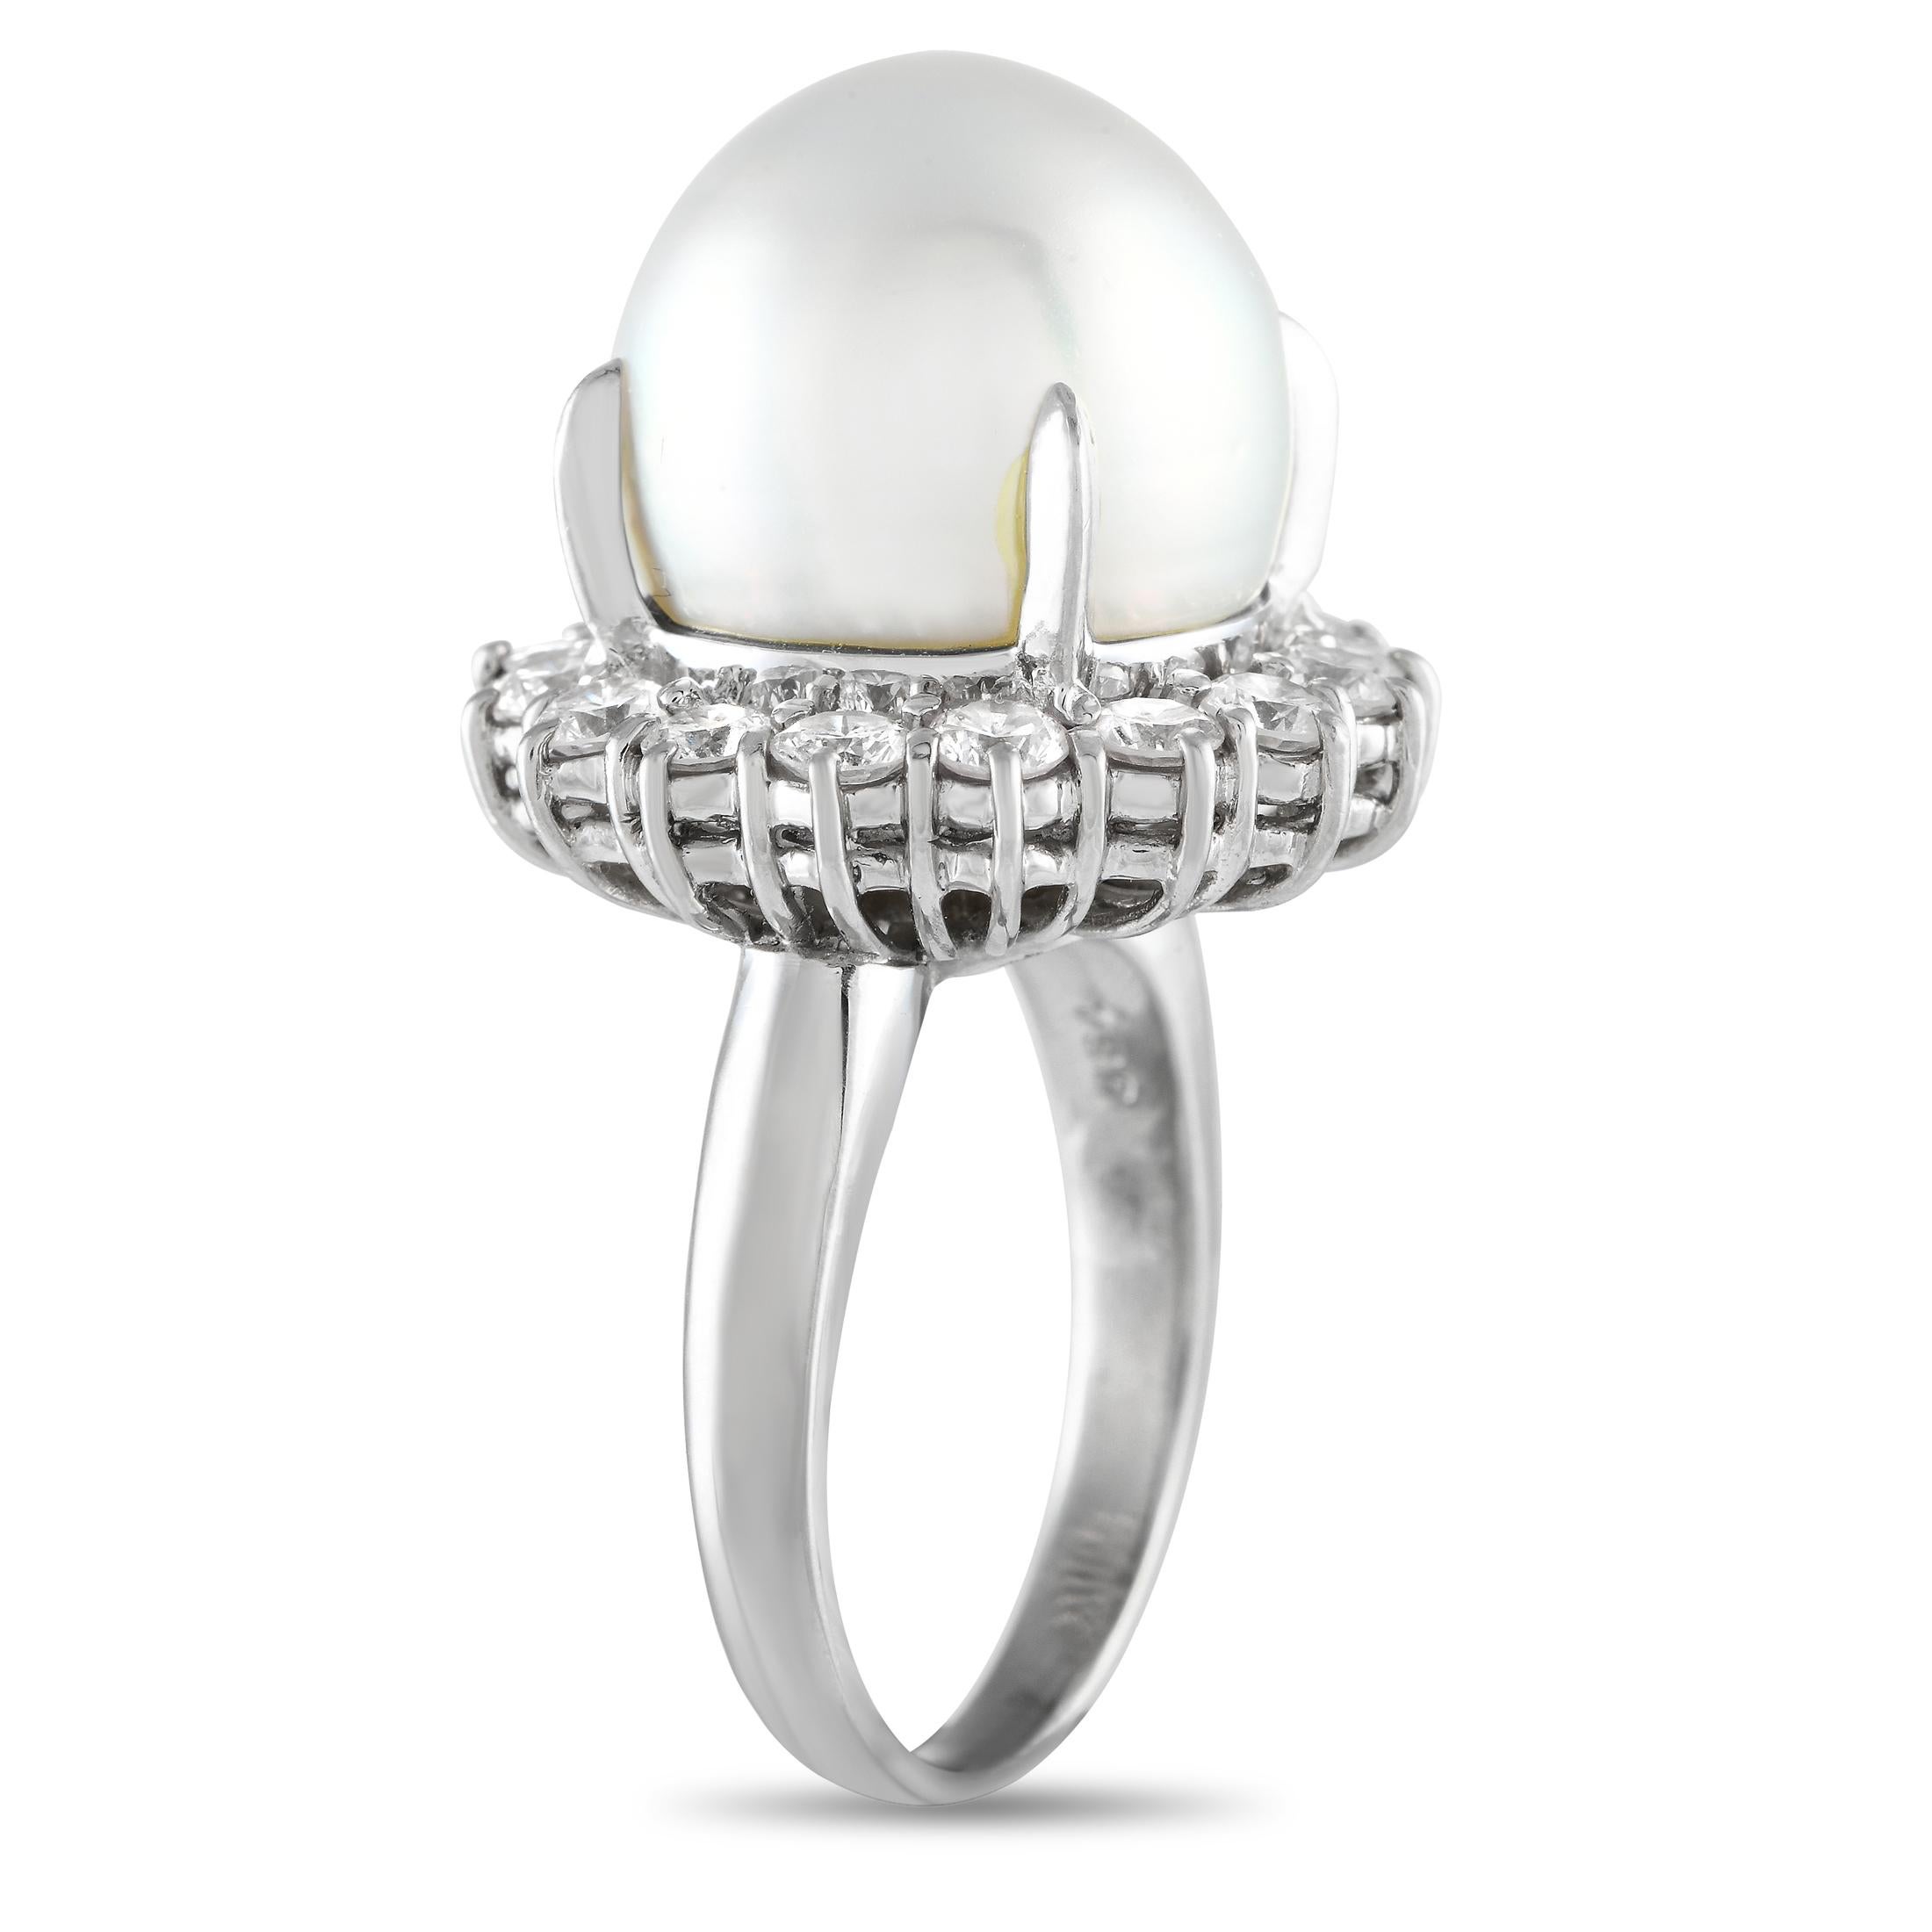 Exuding an air of understated elegance, this diamond and pearl ring will attract eyes and earn compliments. It features a slender platinum band that contrasts beautifully with the oversized centerpiece where a 15mm pearl rests on four slim prongs,